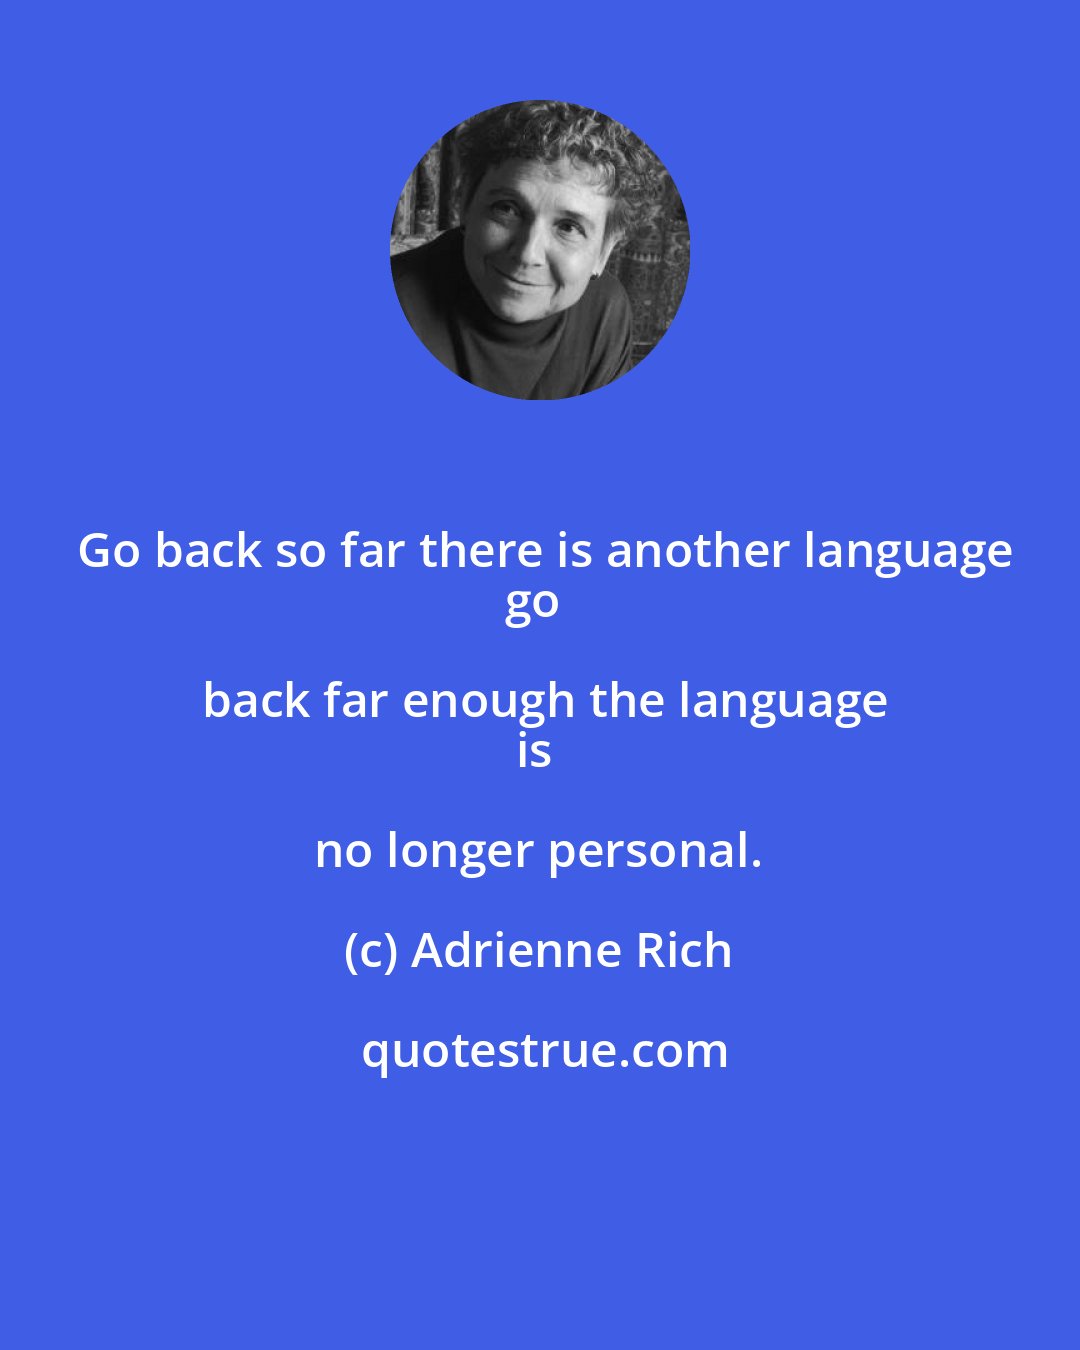 Adrienne Rich: Go back so far there is another language
go back far enough the language
is no longer personal.